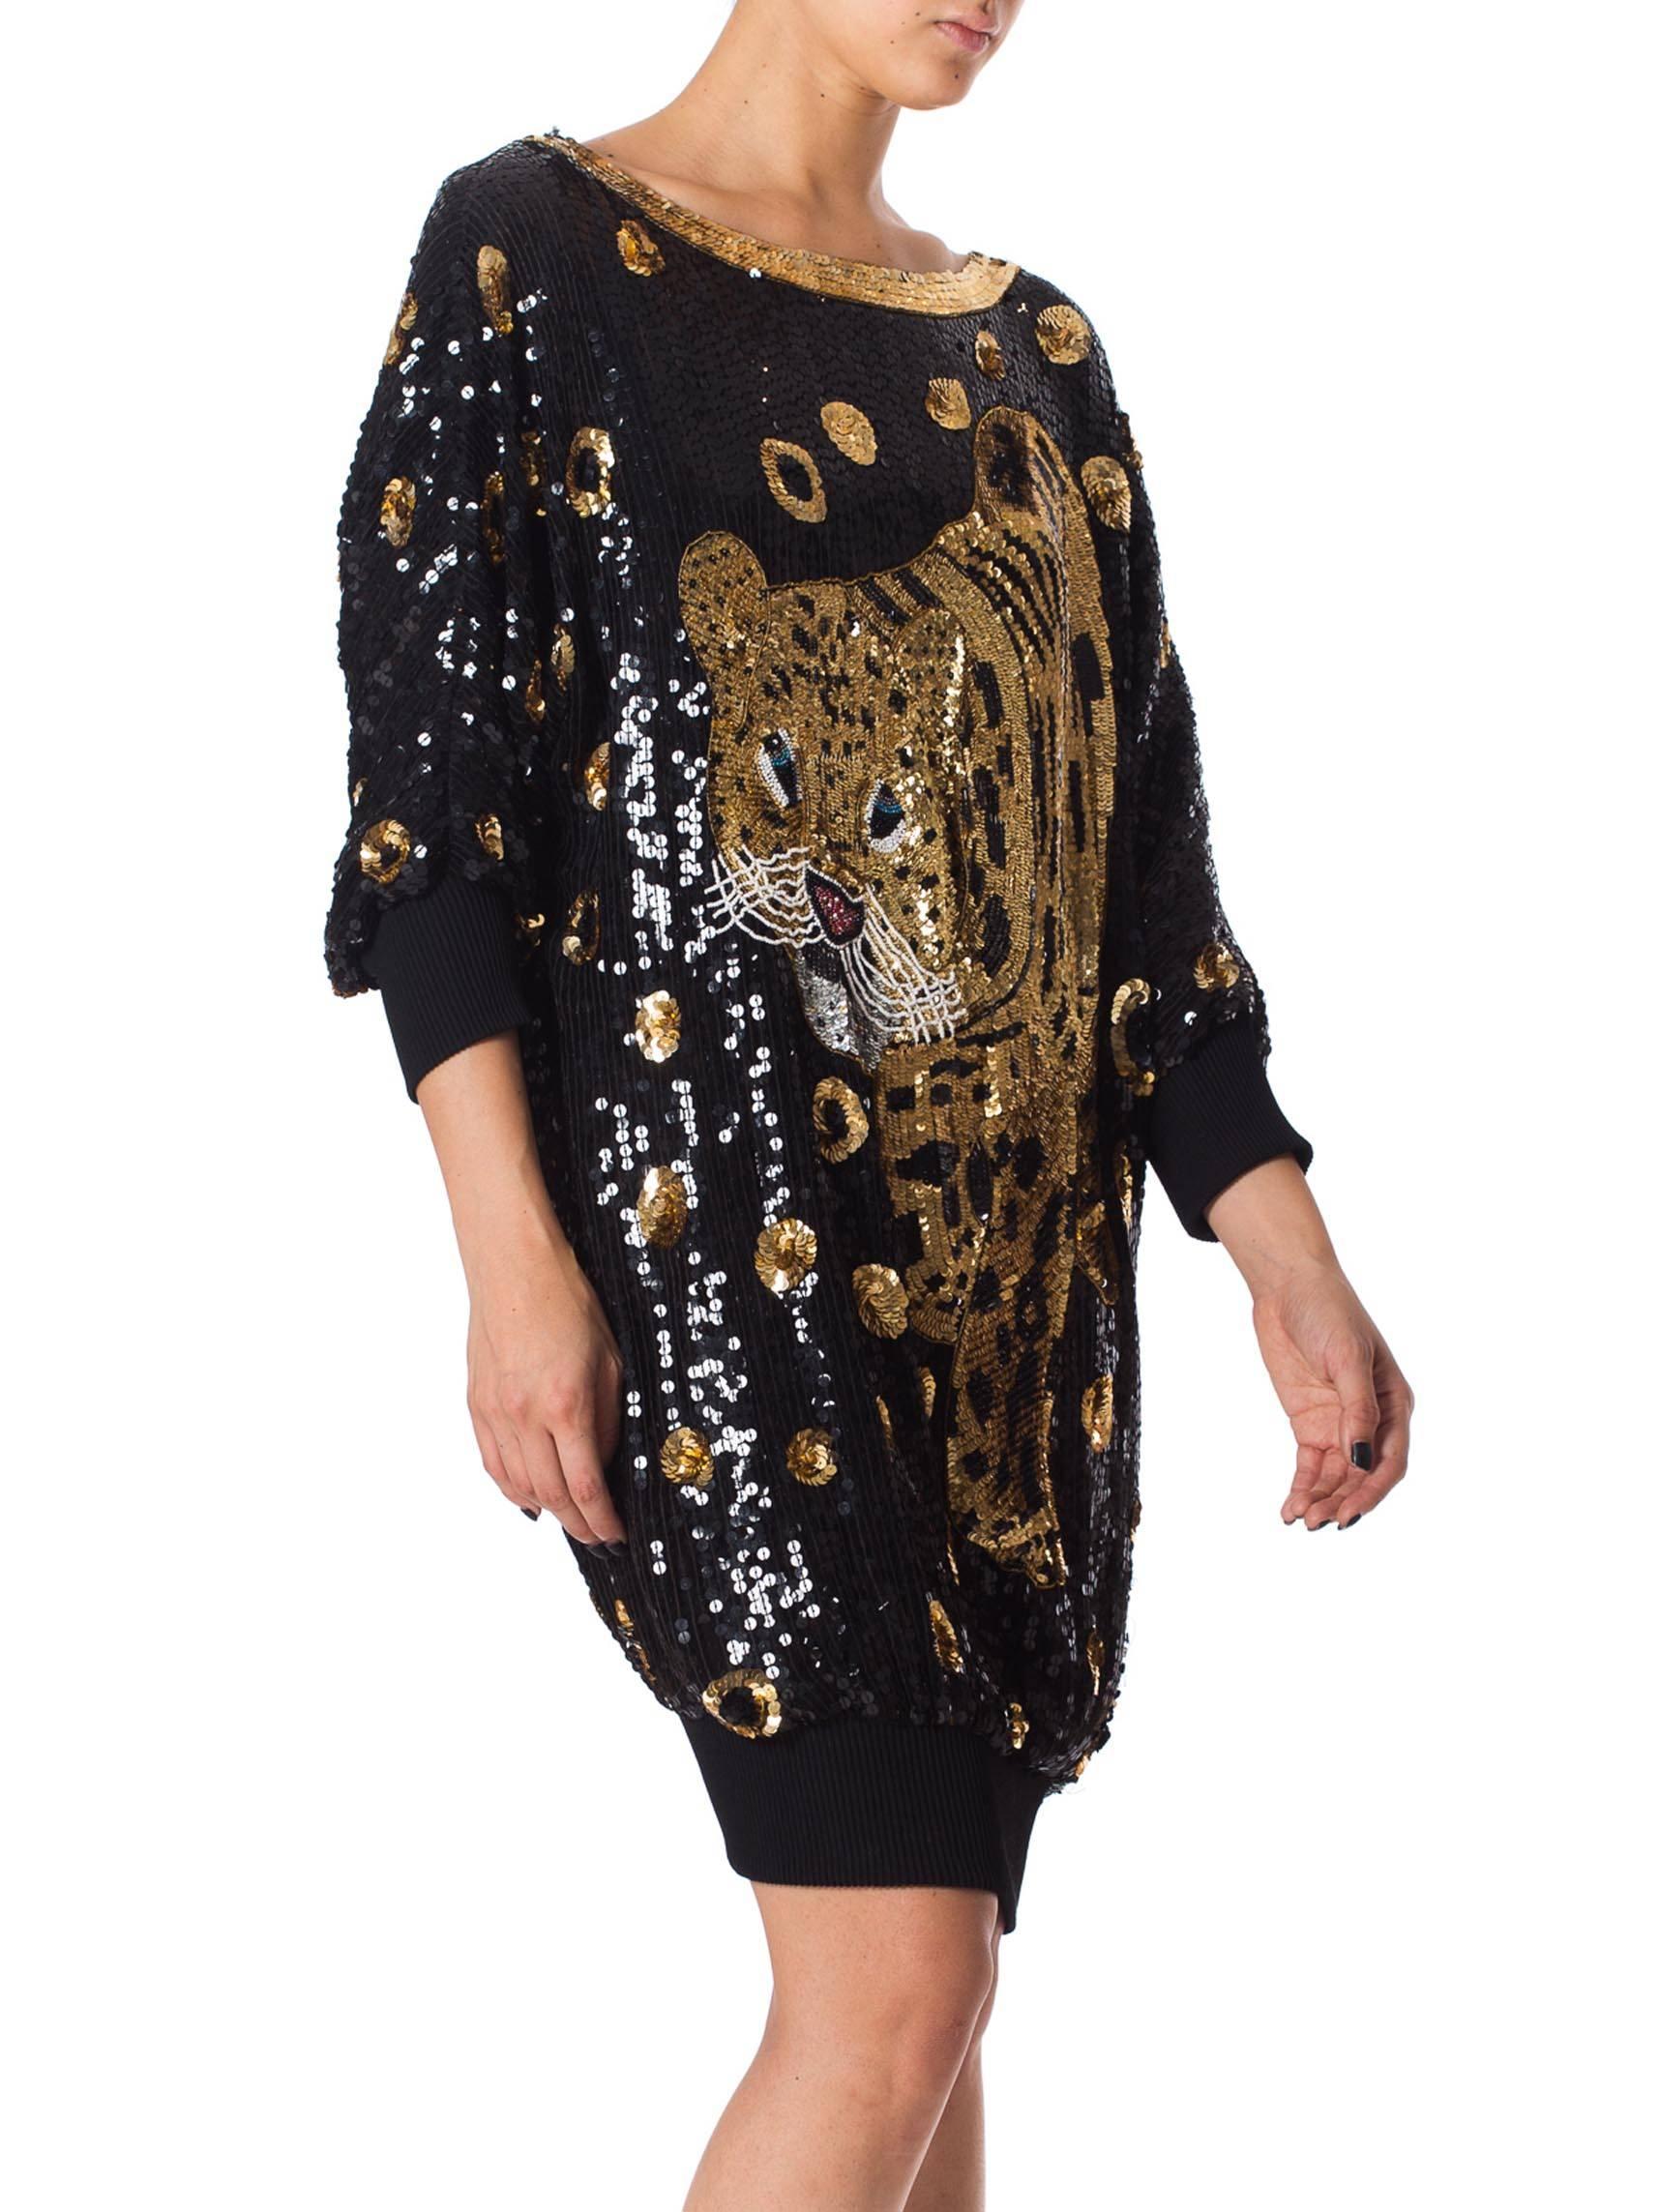 Black 1980s Gucci Style Sequined Tiger Leopard Oversized Pullover Top Dress